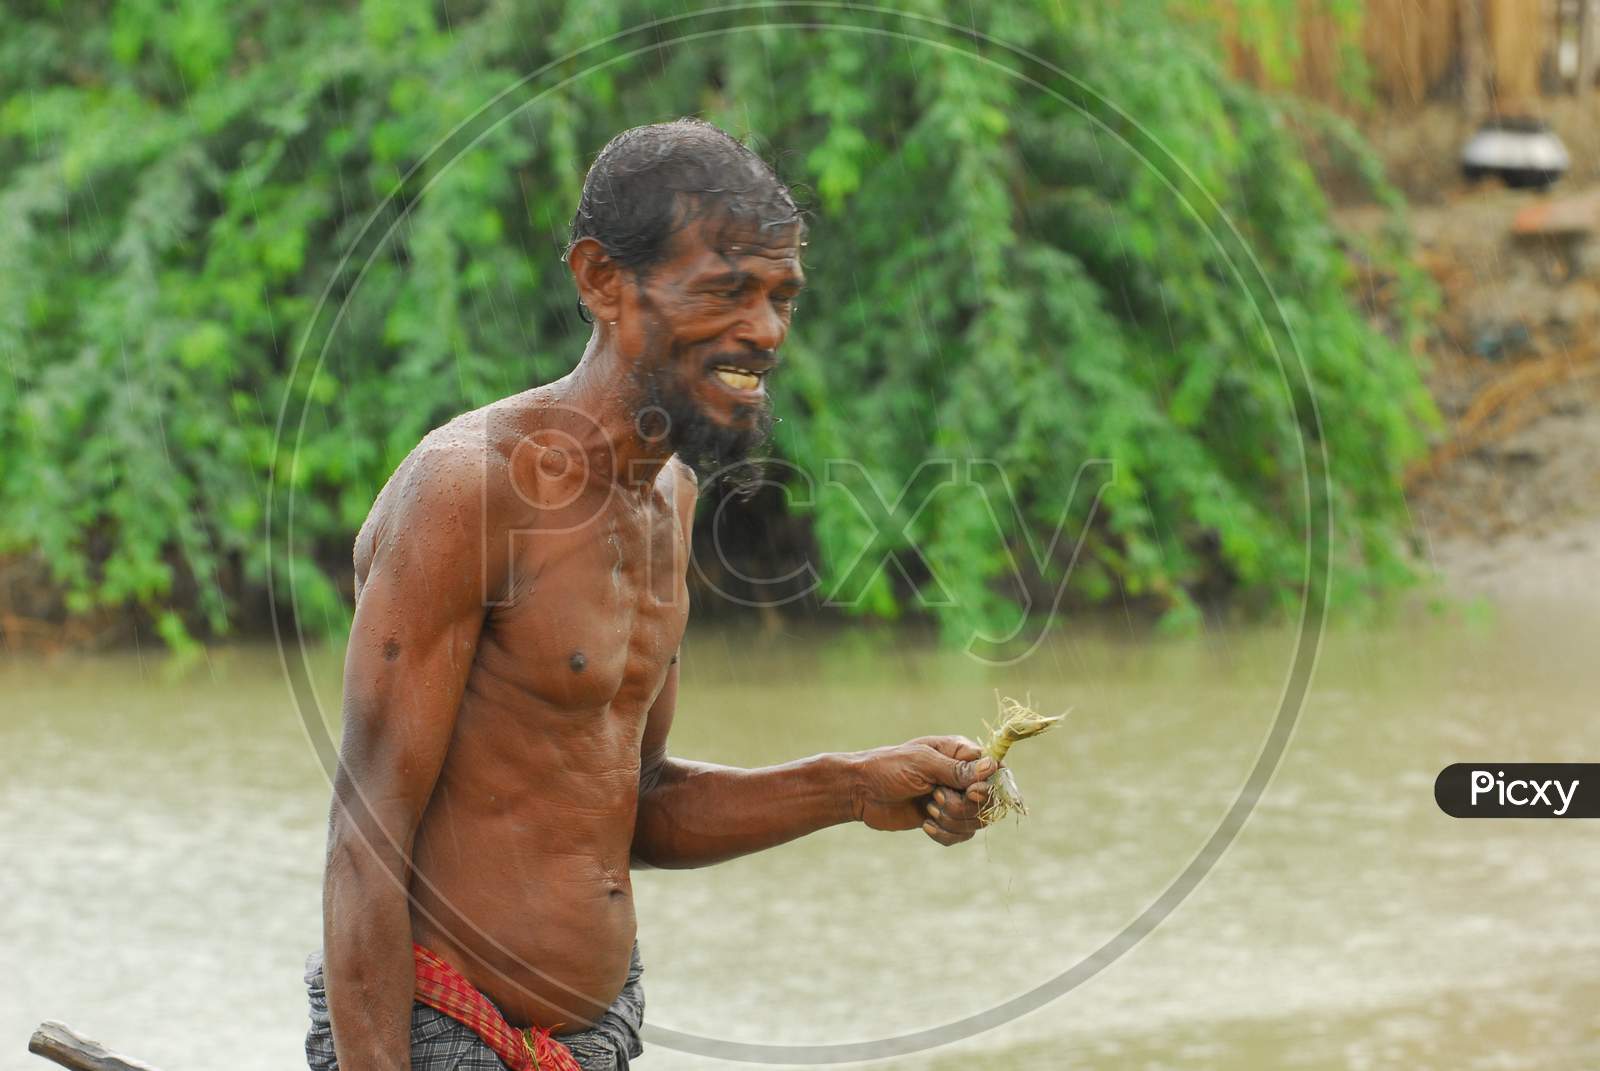 Indian fisherman with a shrimp